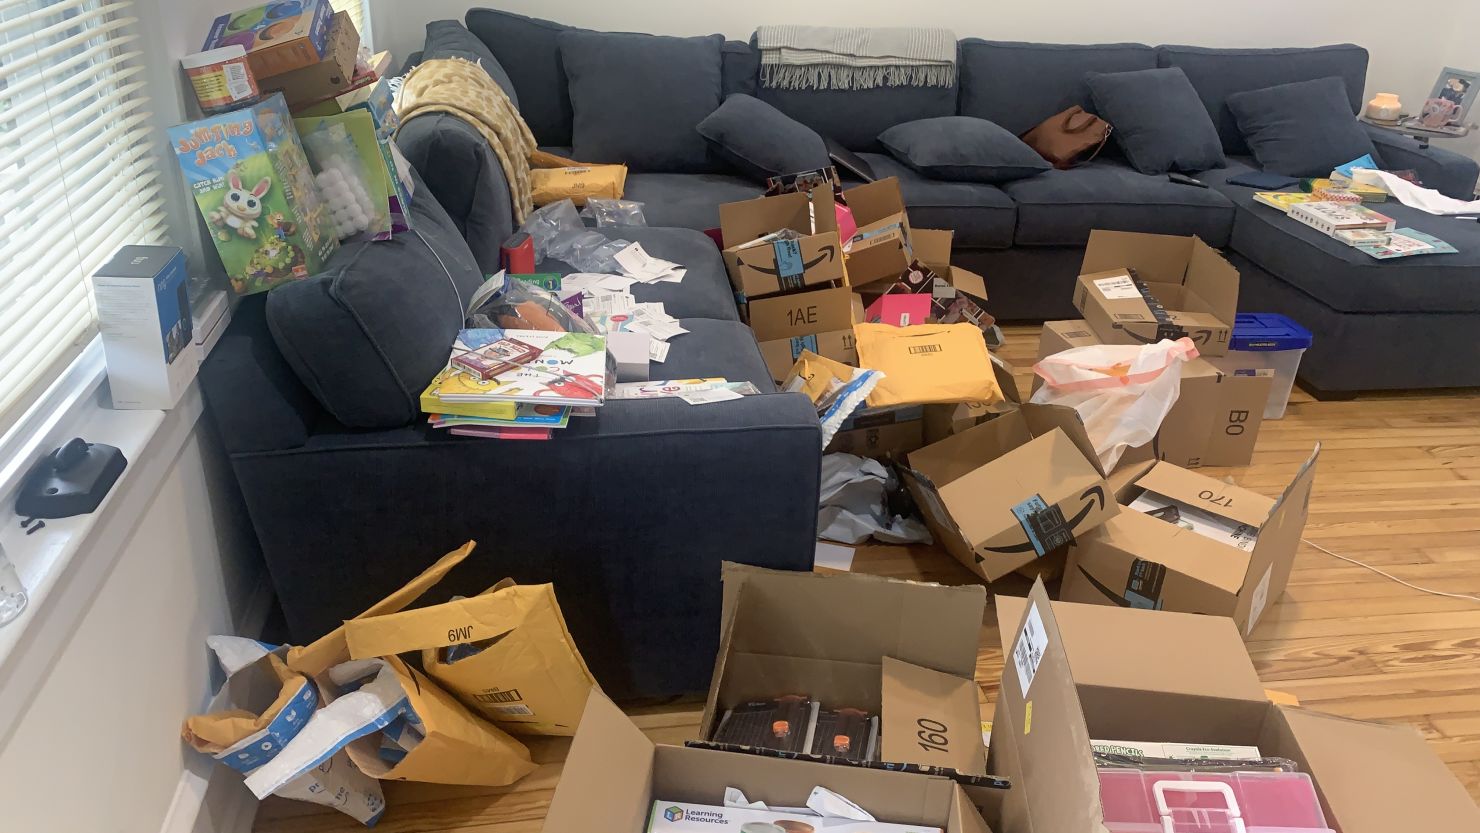 Teacher Laura Ciervo said she has received over 100 packages since comedian Erin Foster shared her Amazon wish list on her Instagram story three weeks ago.